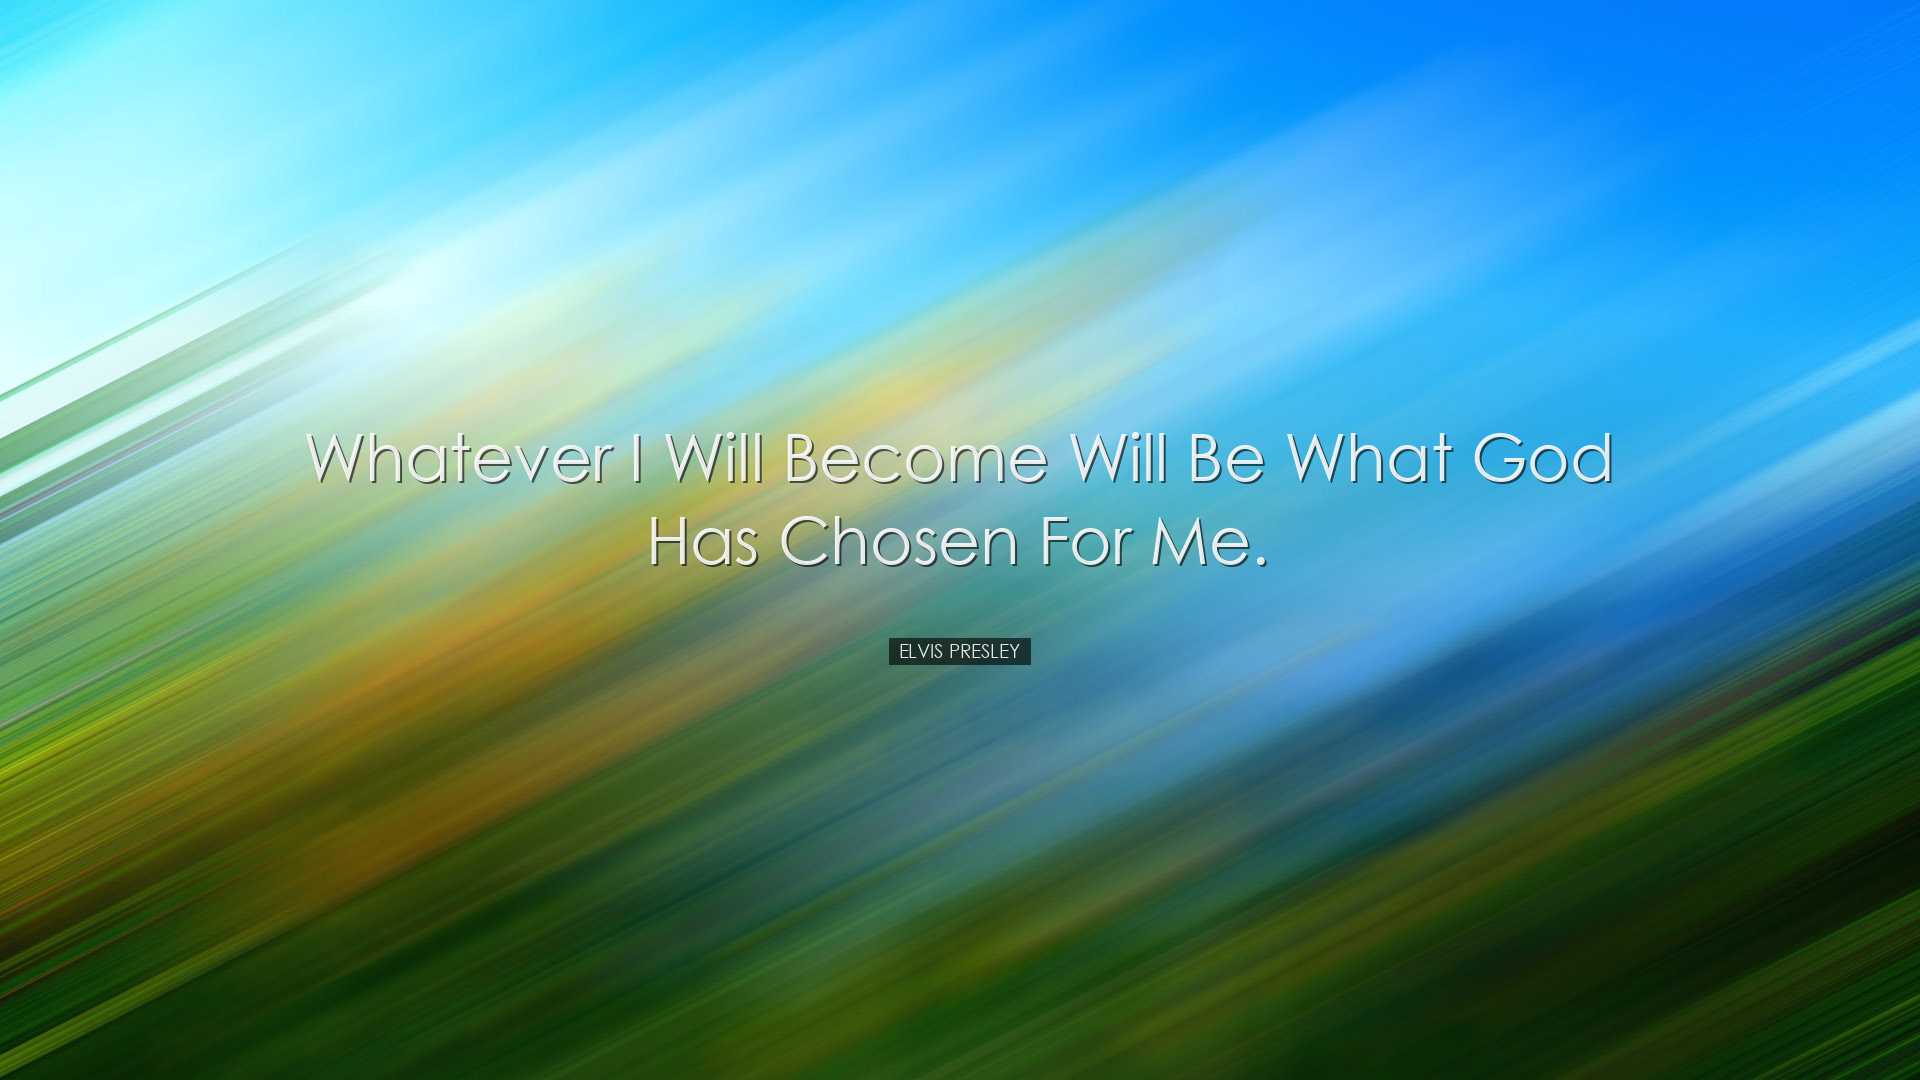 Whatever I will become will be what God has chosen for me. - Elvis